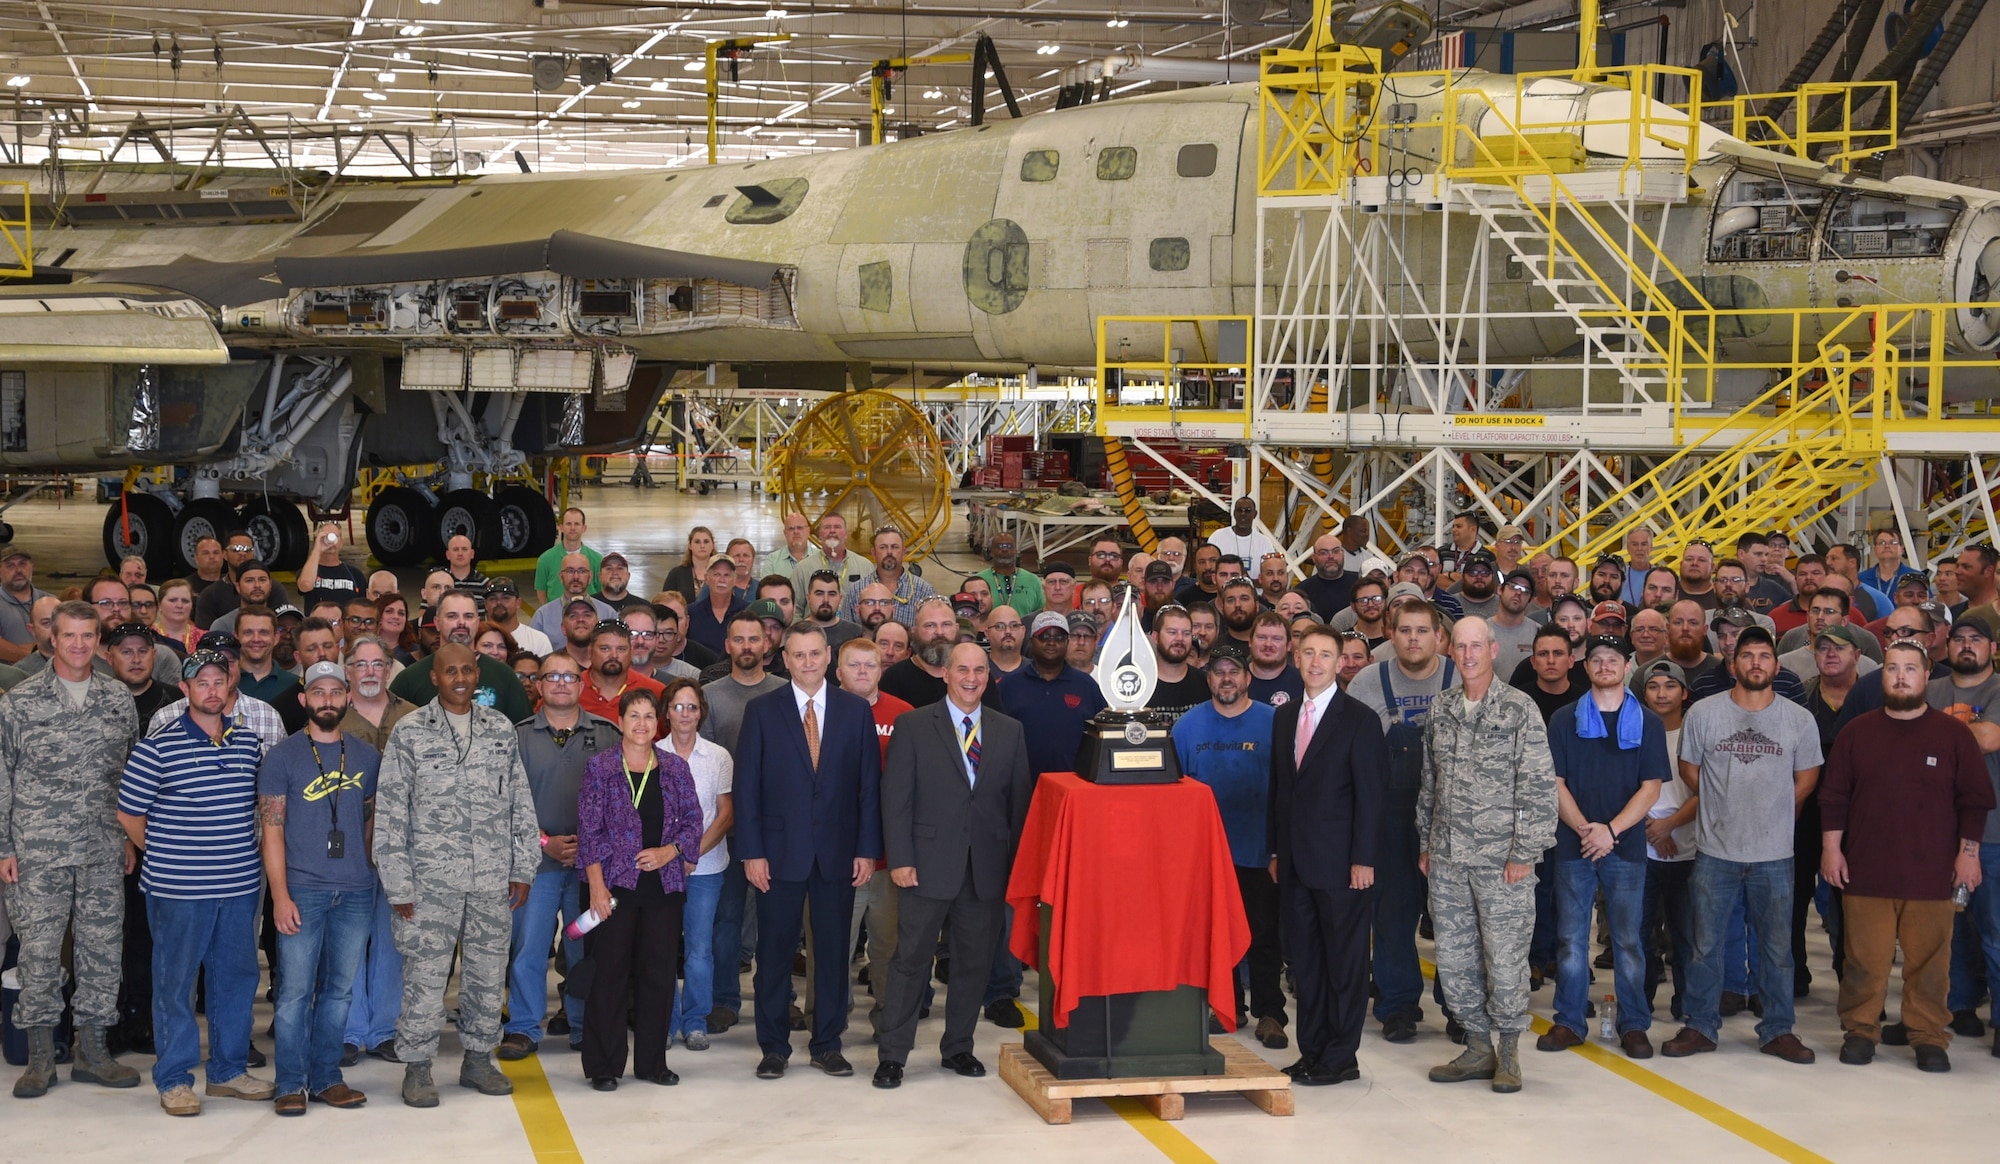 Senior leaders from the Department of Defense and Oklahoma City Air Logistics Complex stand near the Robert T. Mason trophy along with workers following the formal presention to the 567th Aircraft Maintenance Squadron on June 27, 2018, Tinker Air Force Base, Oklahoma. The 567th was recognized for their work on the ongoing B-1B Integrated Battle Station upgrades.